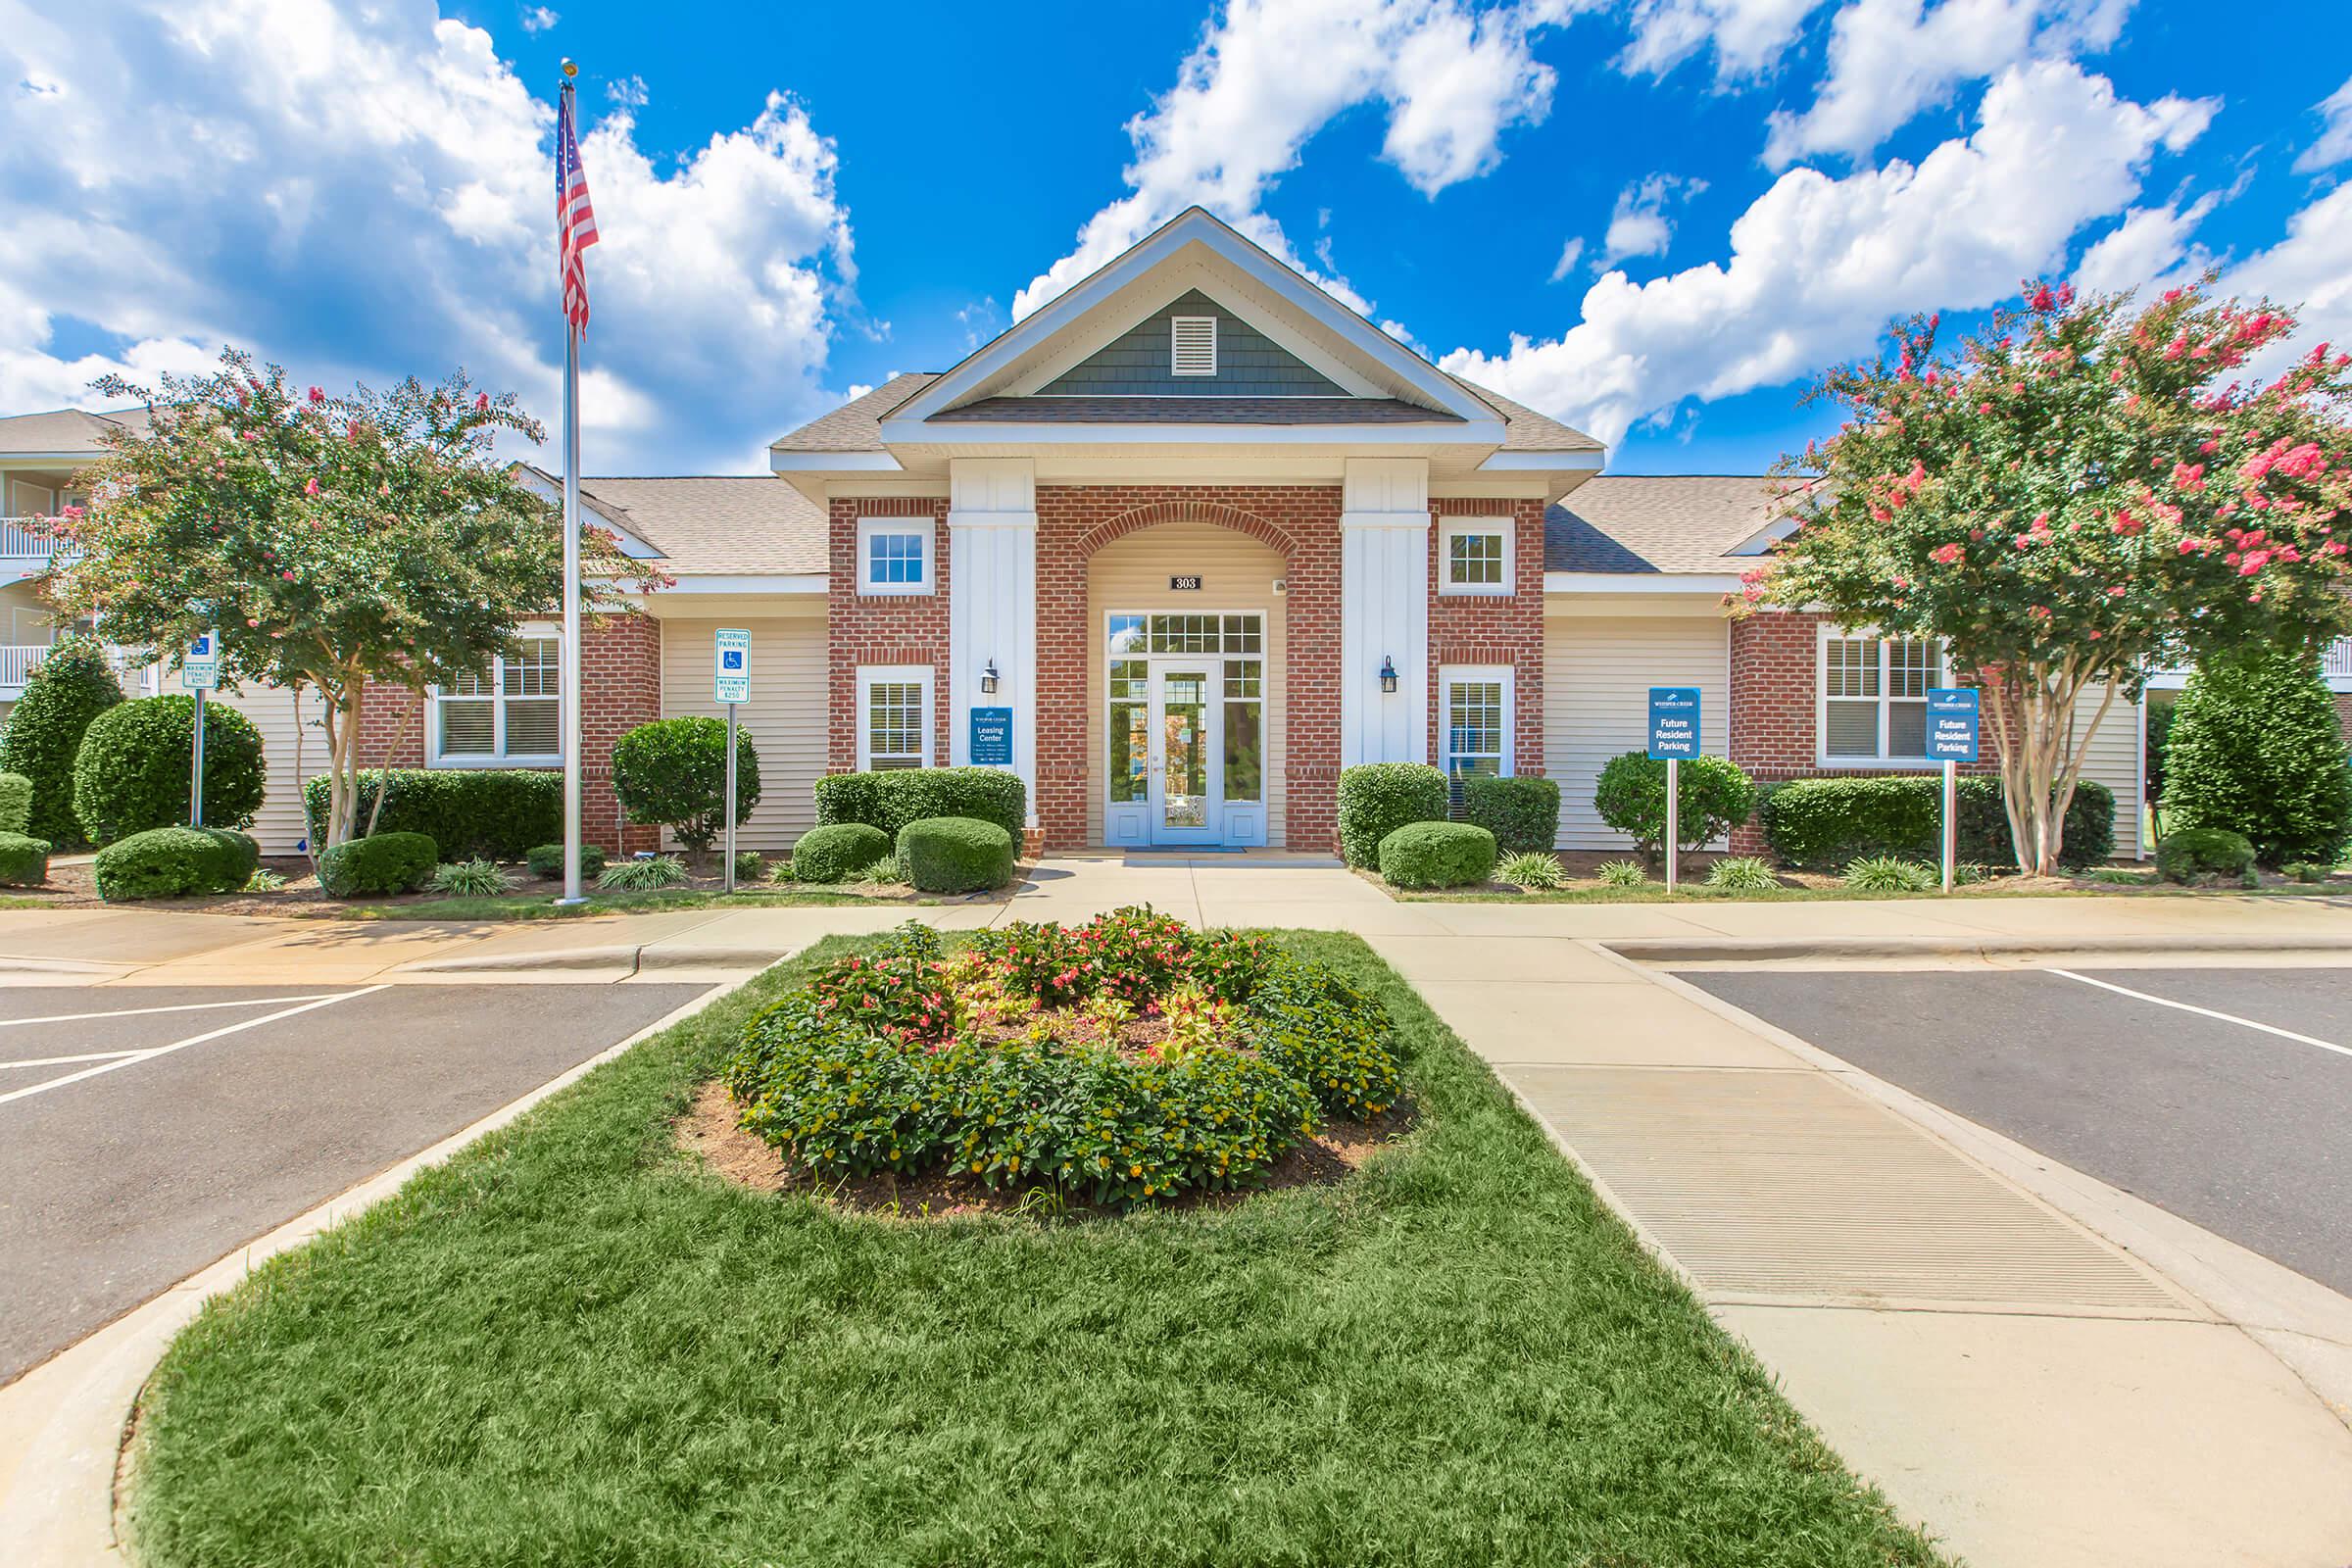 Come find your new home at Whisper Creek in Rock Hill, SC.